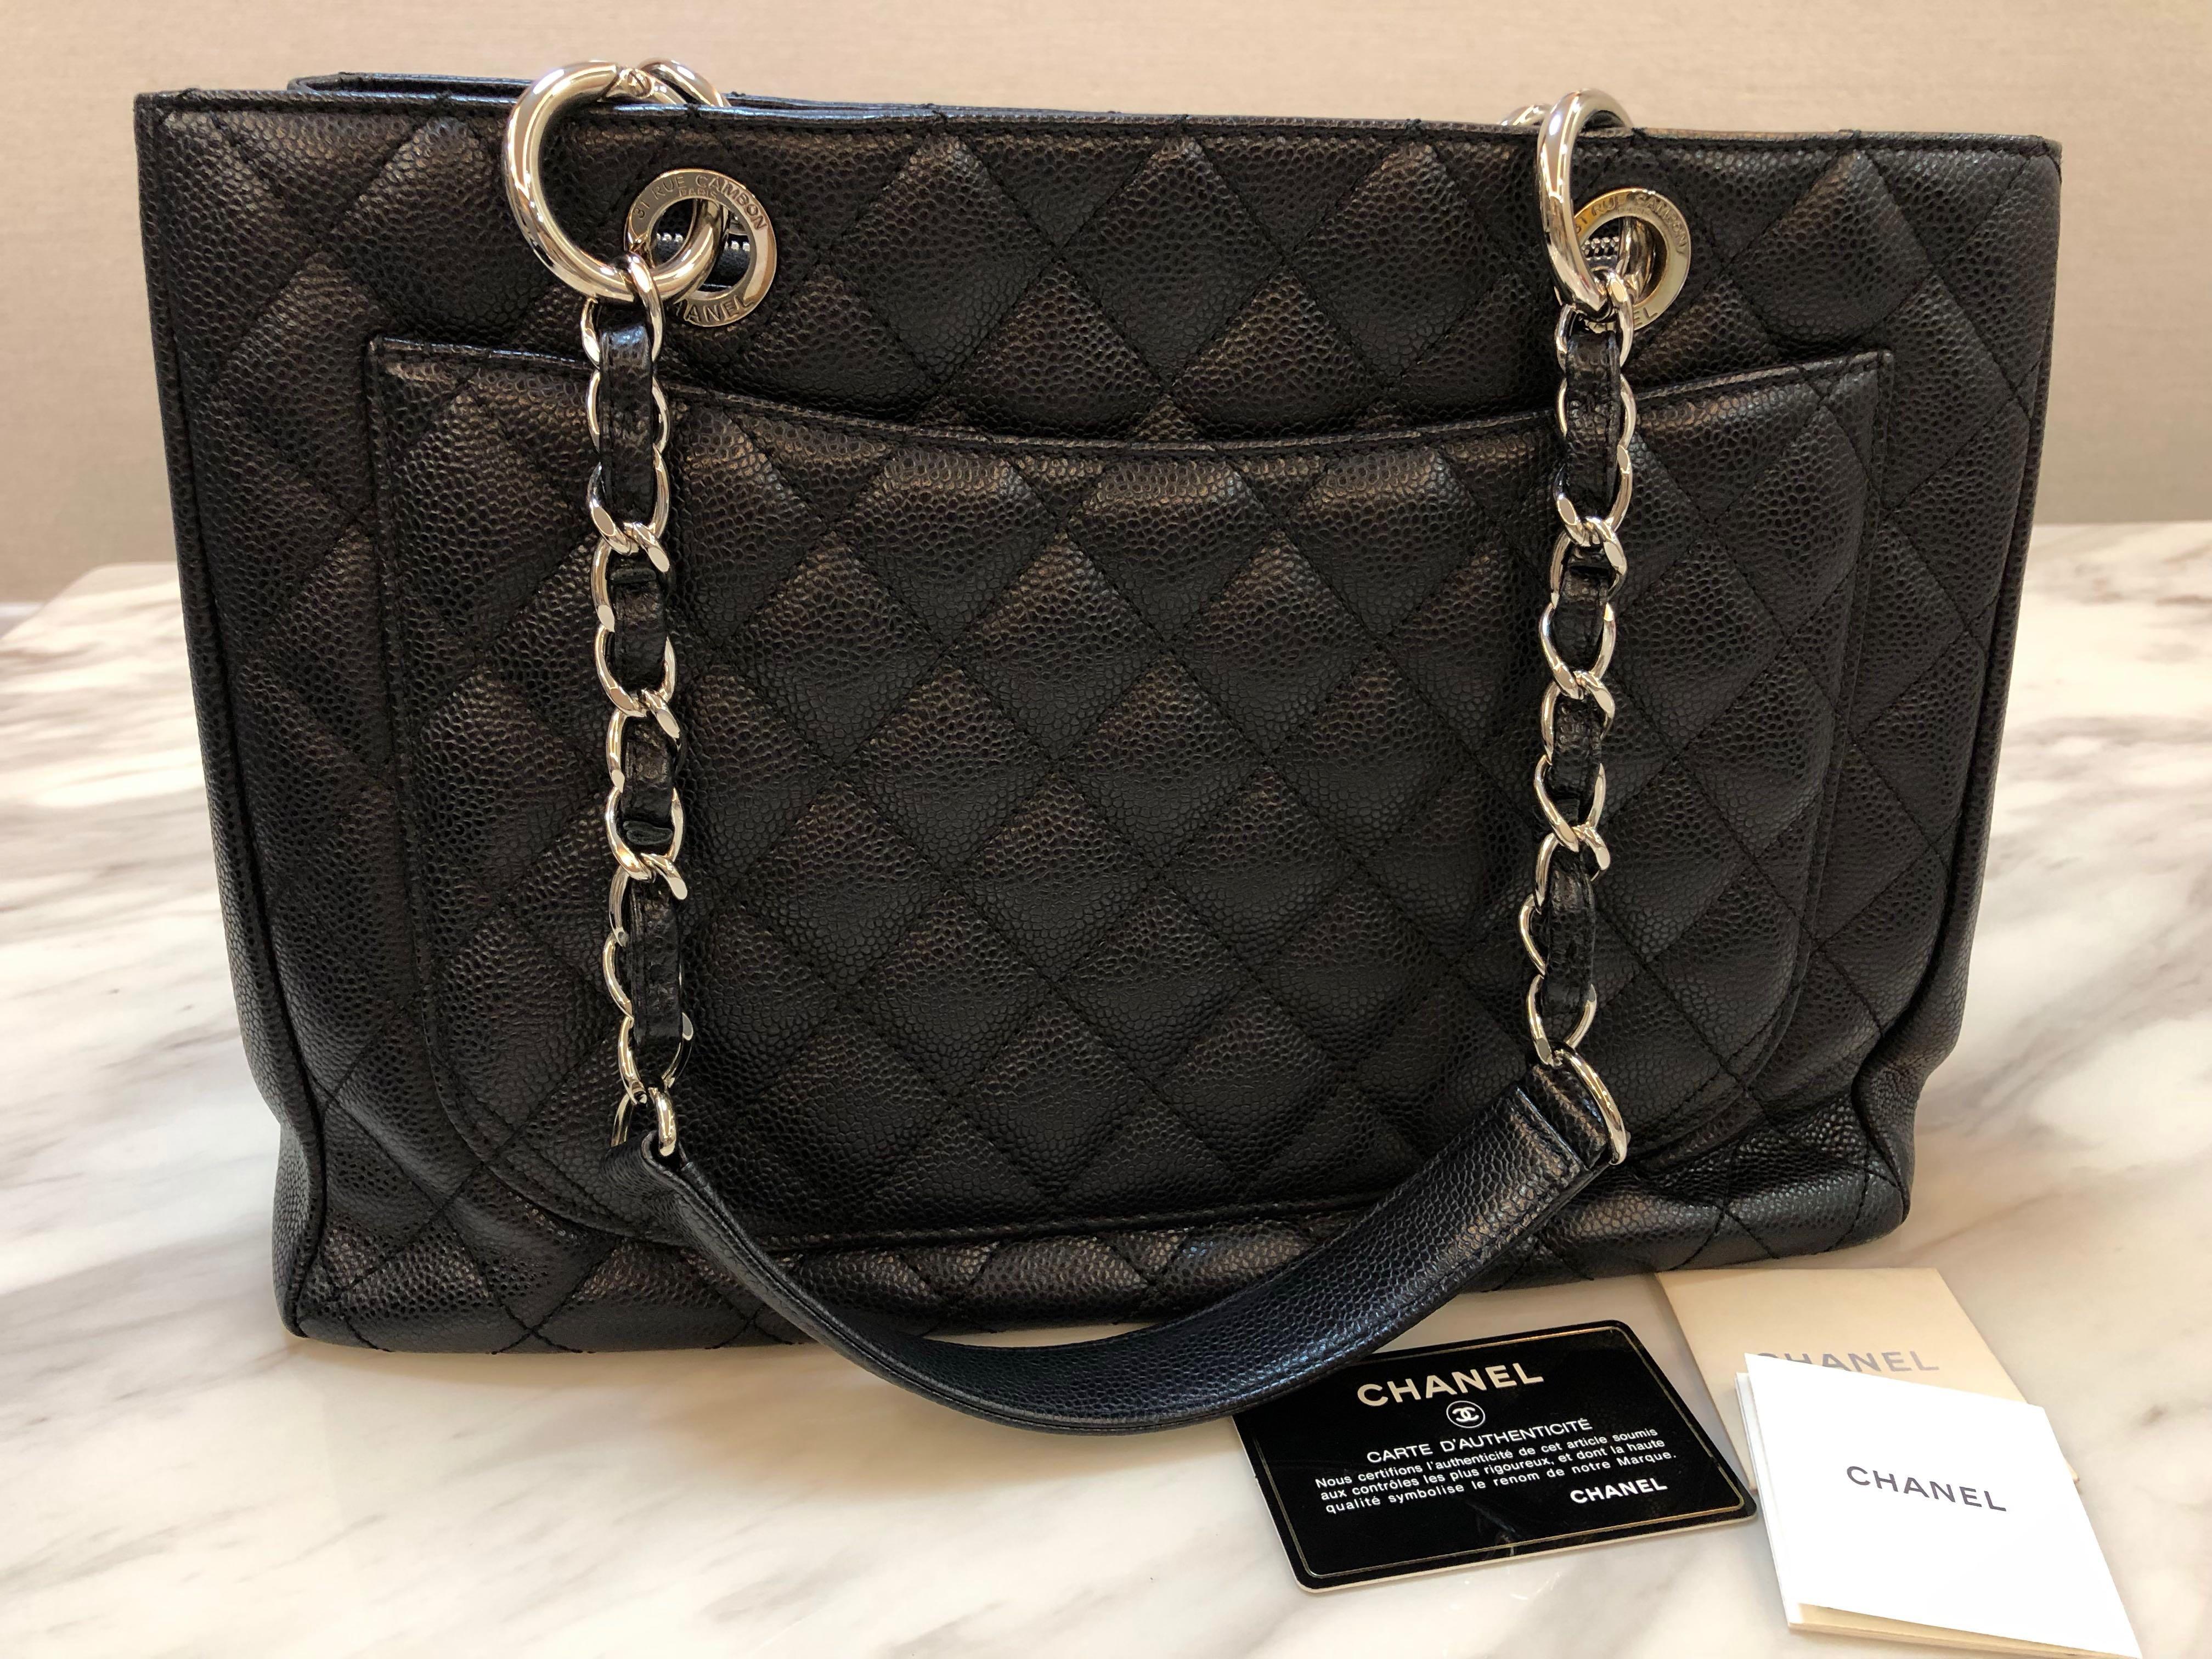 Price reduced! Almost new condition Chanel GST bag (100% authentic ...